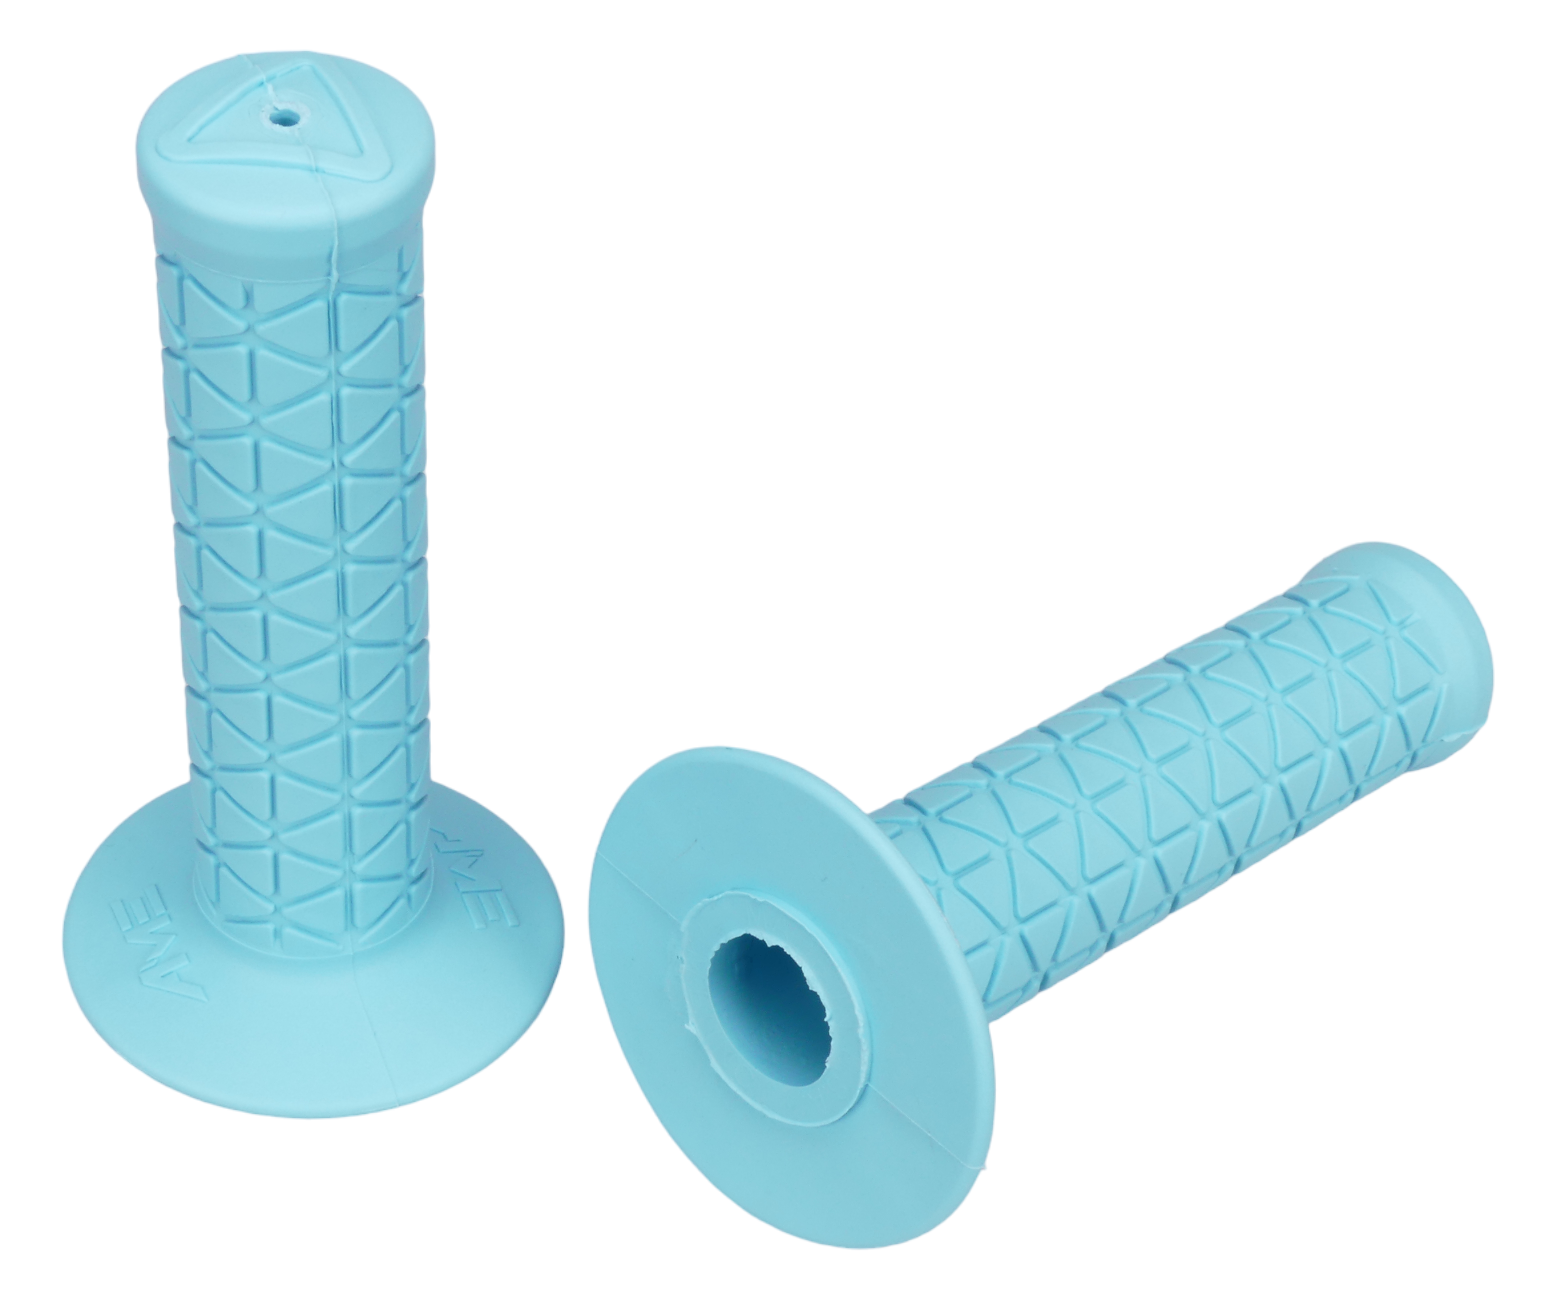 AME old school BMX bicycle grips - TRI - BABY BLUE